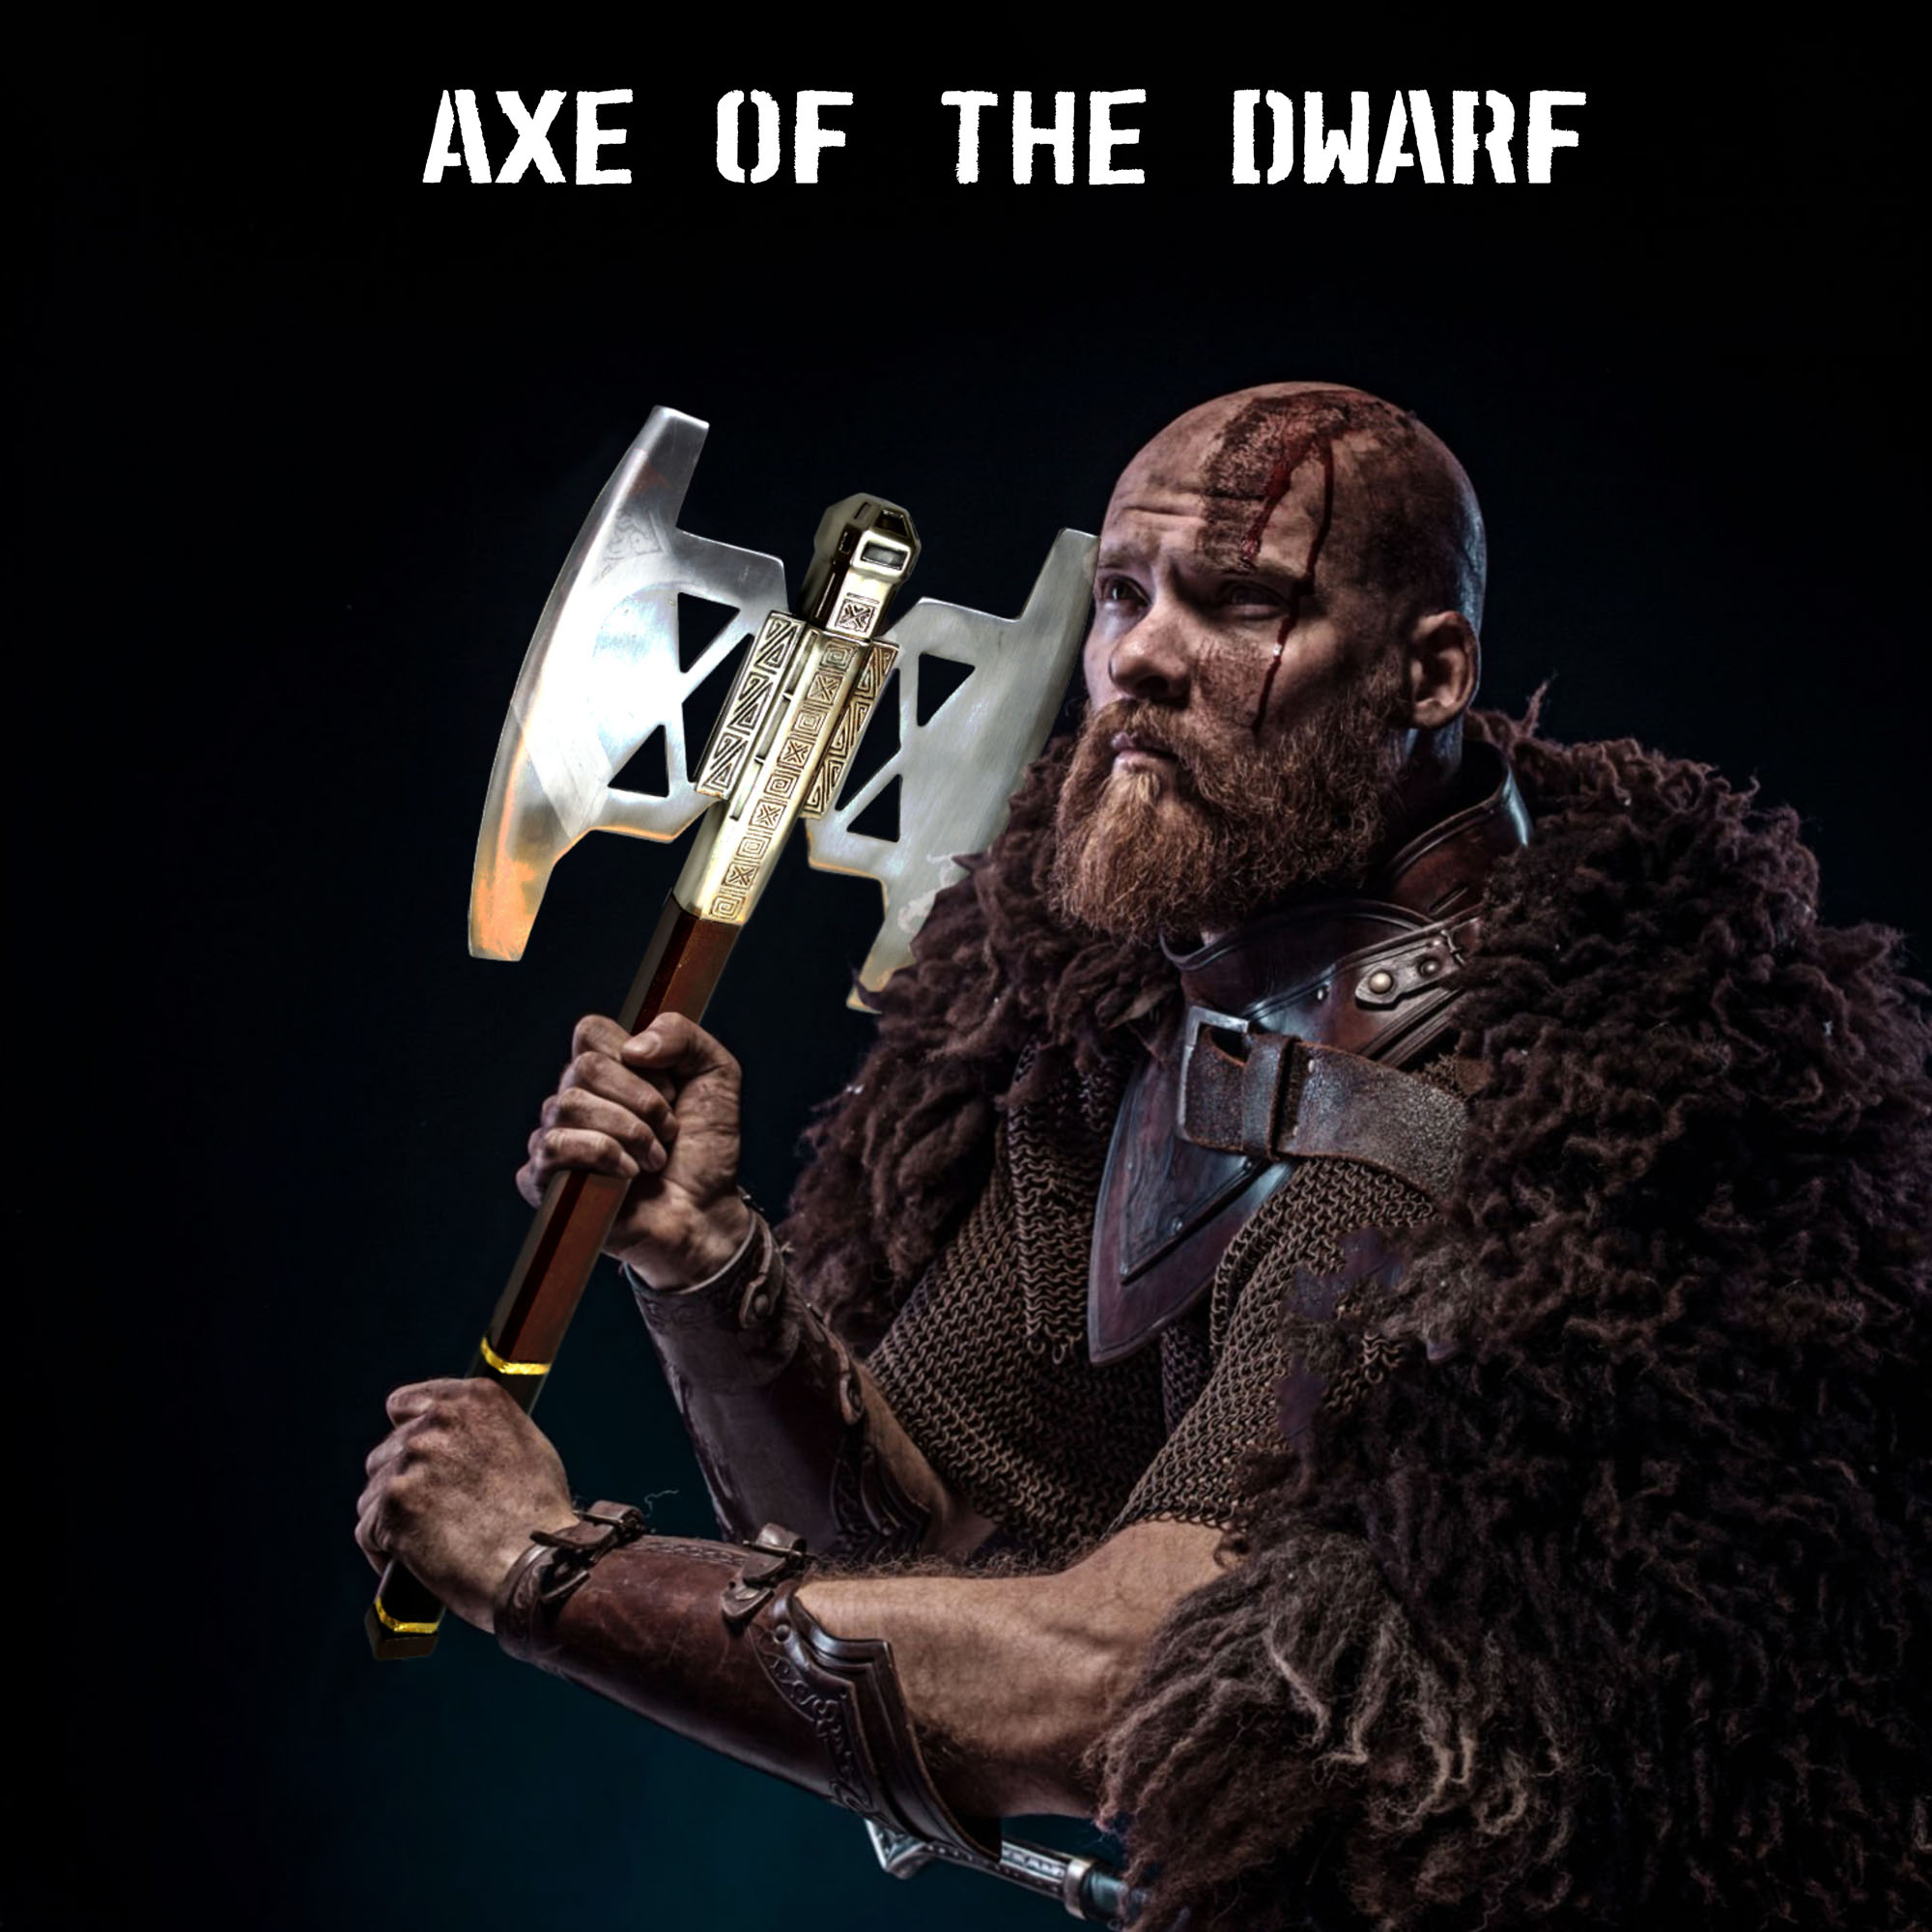 Axe of the dwarf